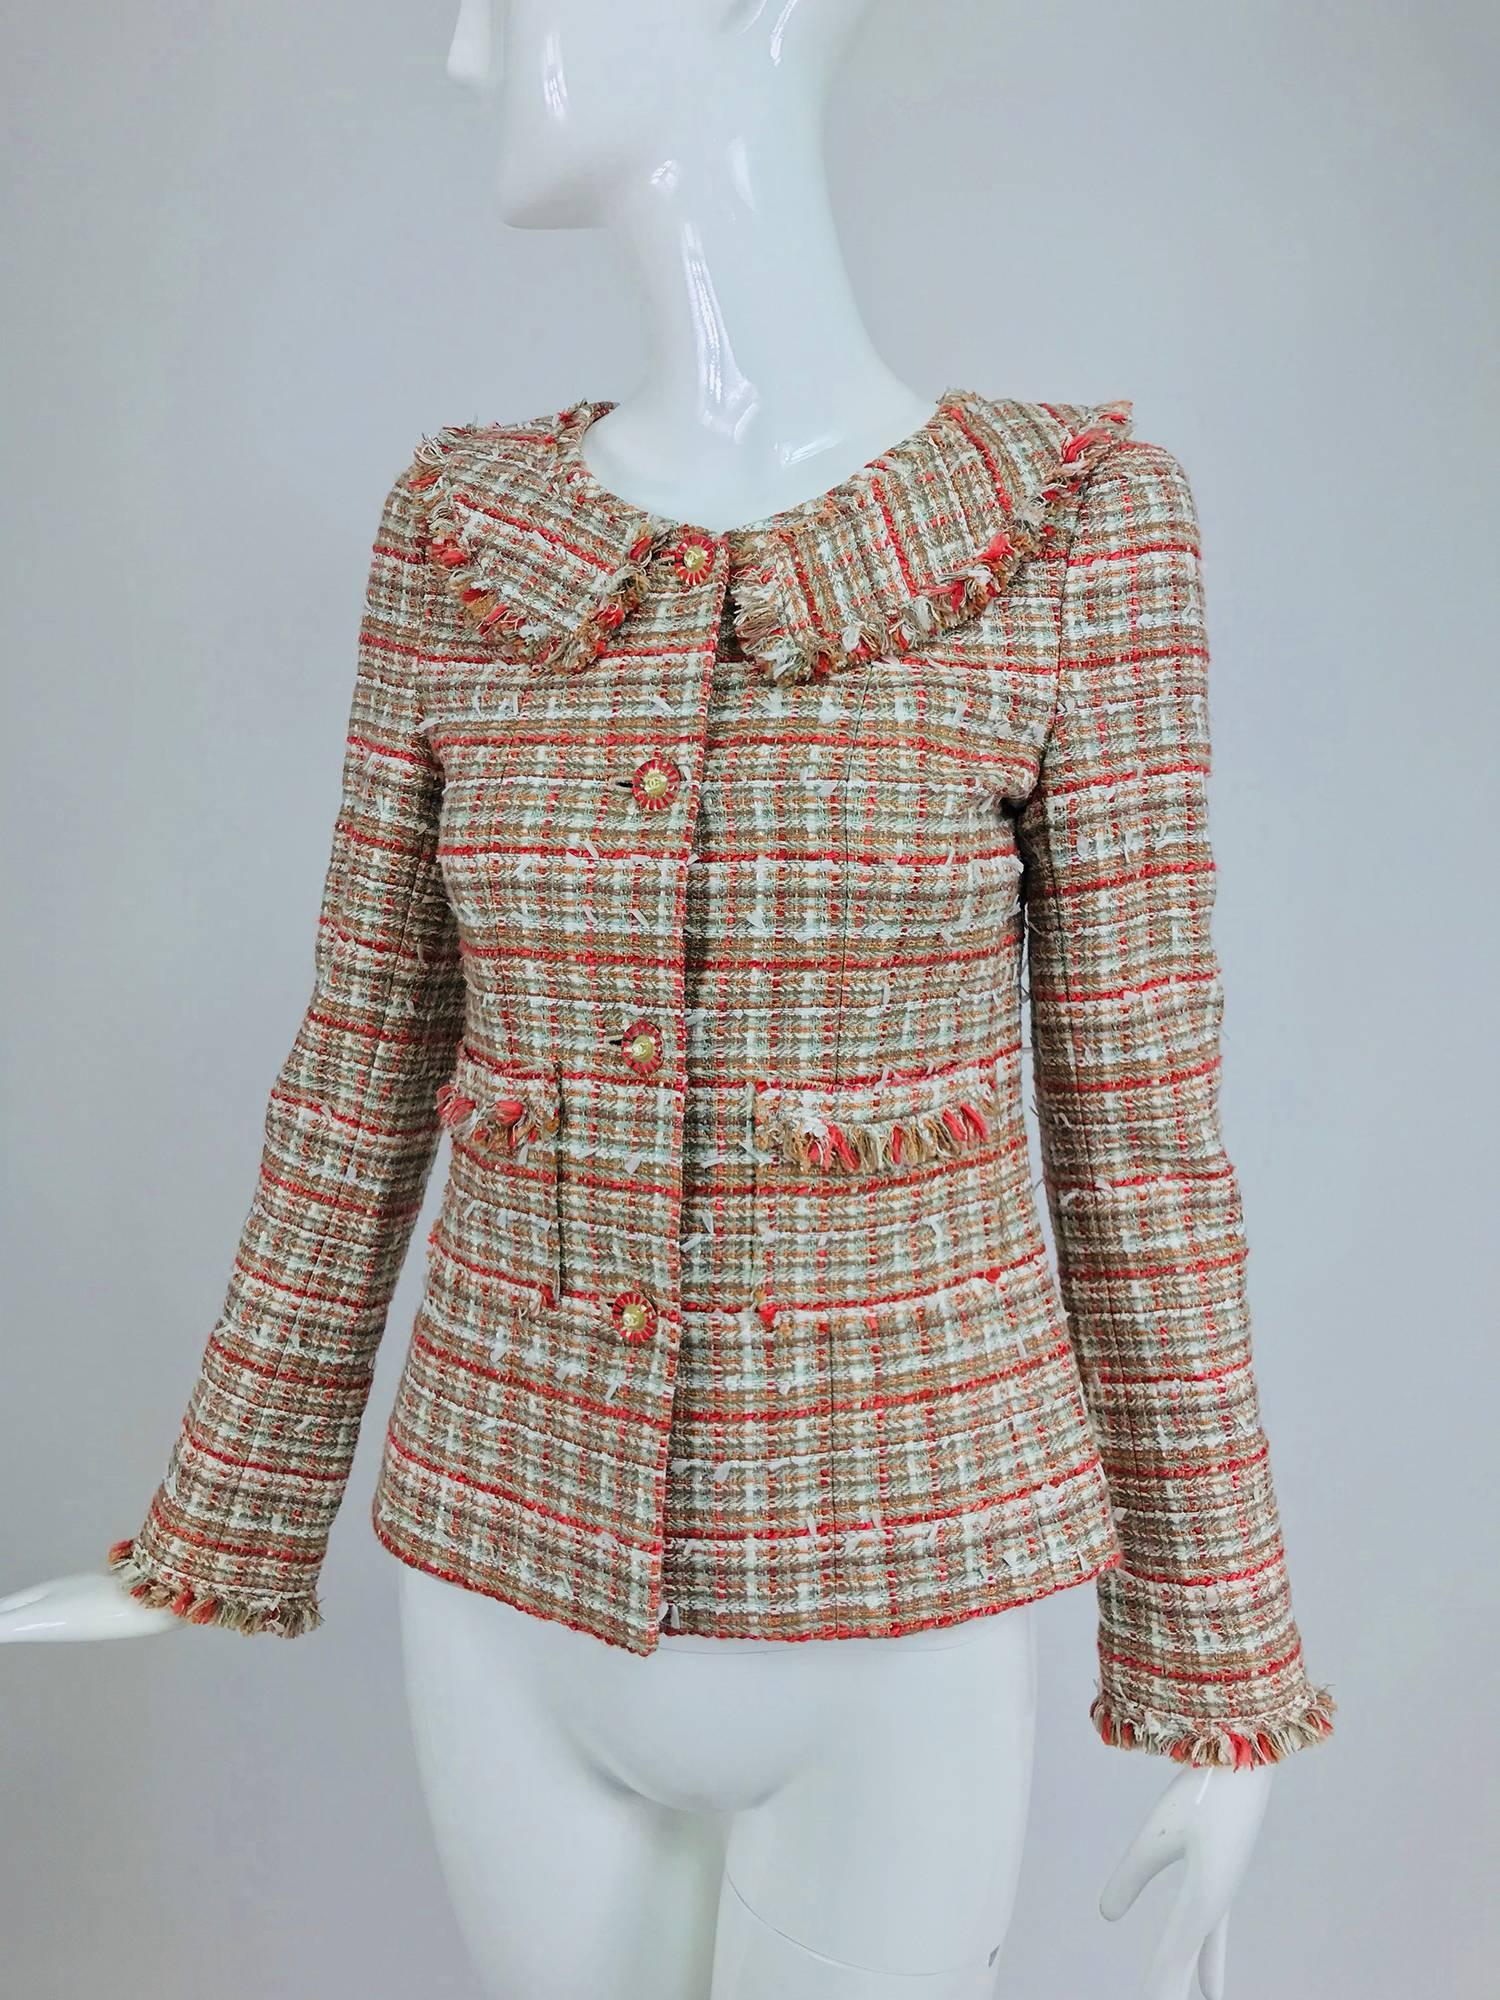 Chanel 04P tweed fringe four pocket jacket with yoke collar...Beautiful jacket in soft colours, coral, moss green and cream...Fringe trim pockets...Logo buttons...Looks barely, if ever worn...Marked size 36
In excellent wearable condition... All our